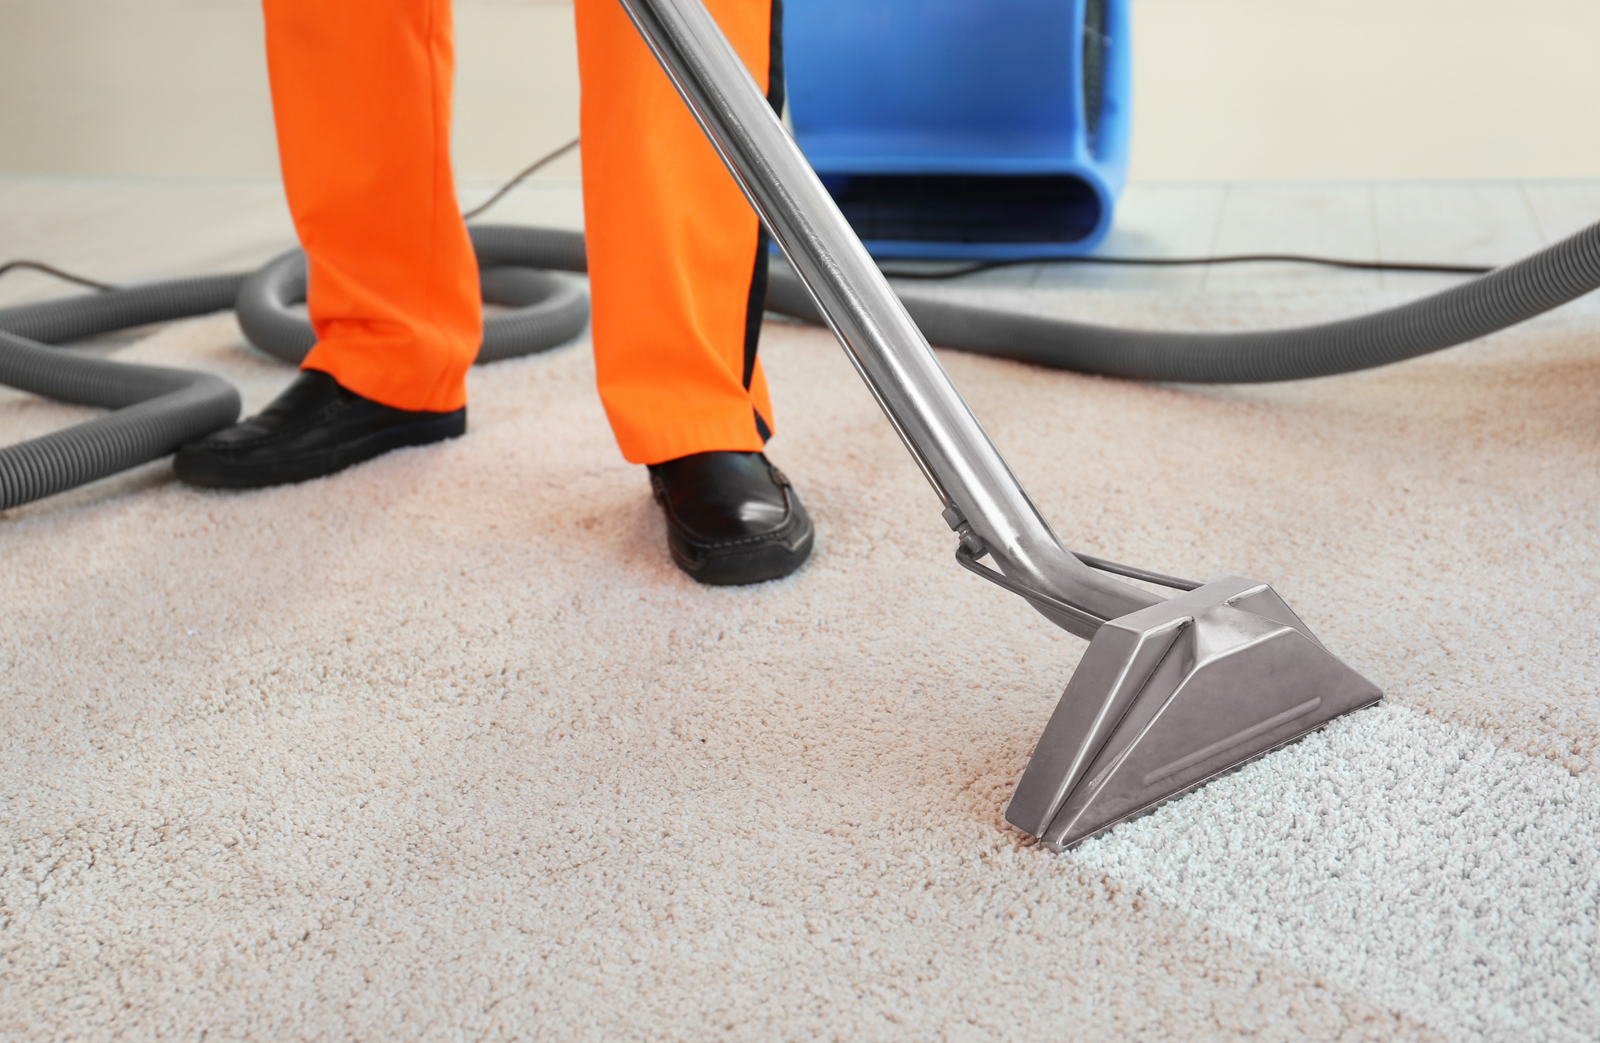 PROFESSIONAL CARPET CLEANING SERVICES IN NEW JERSEY AND PENNSYLVANIA